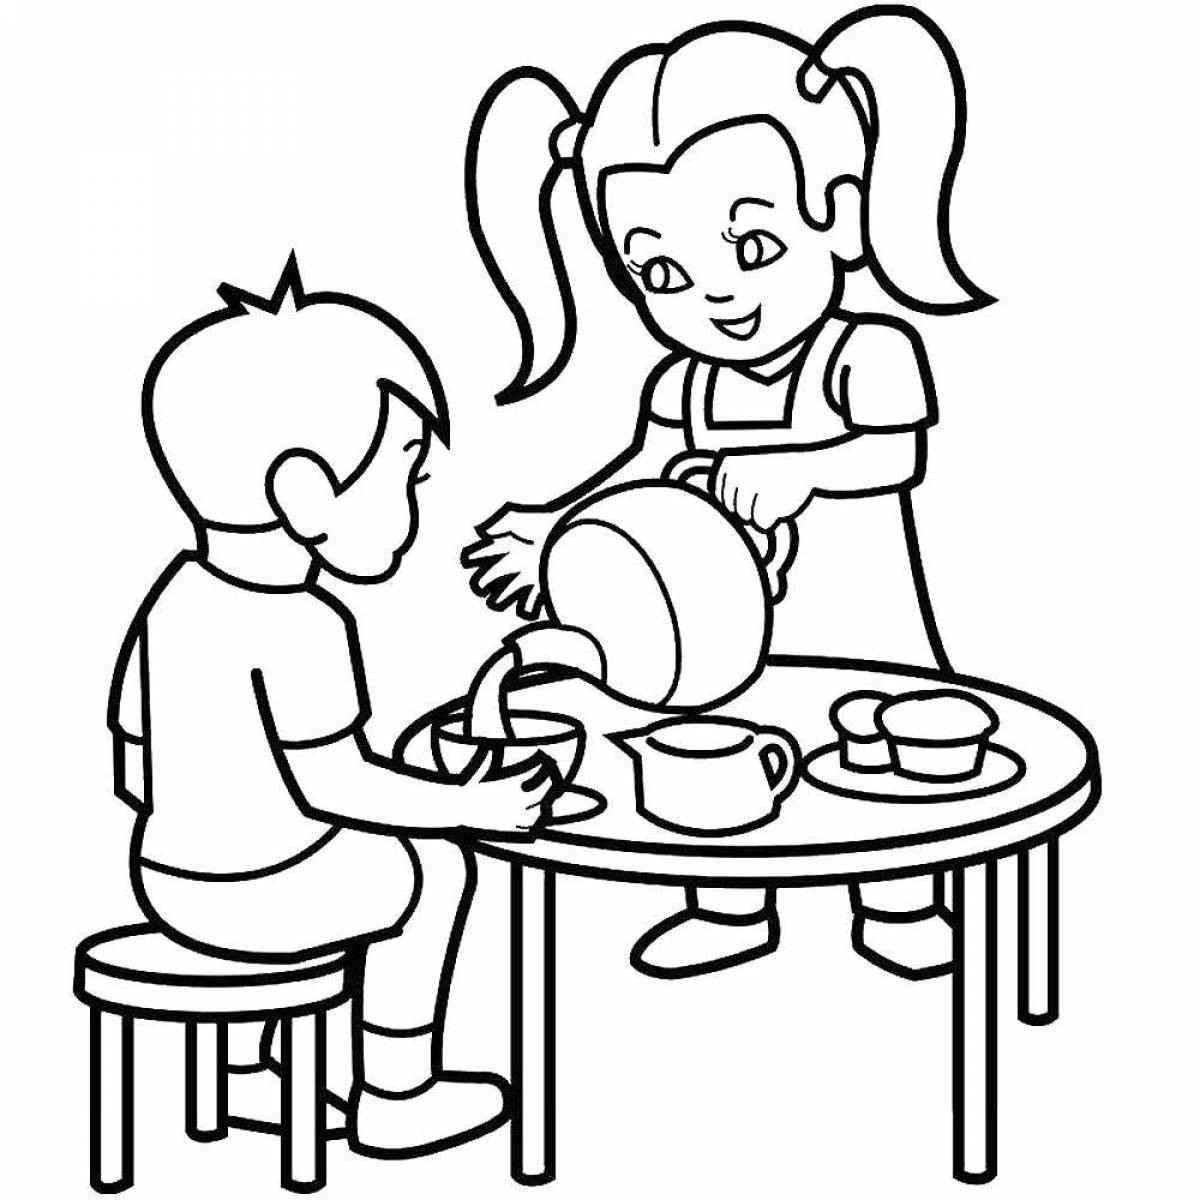 Radiant drink coloring pages